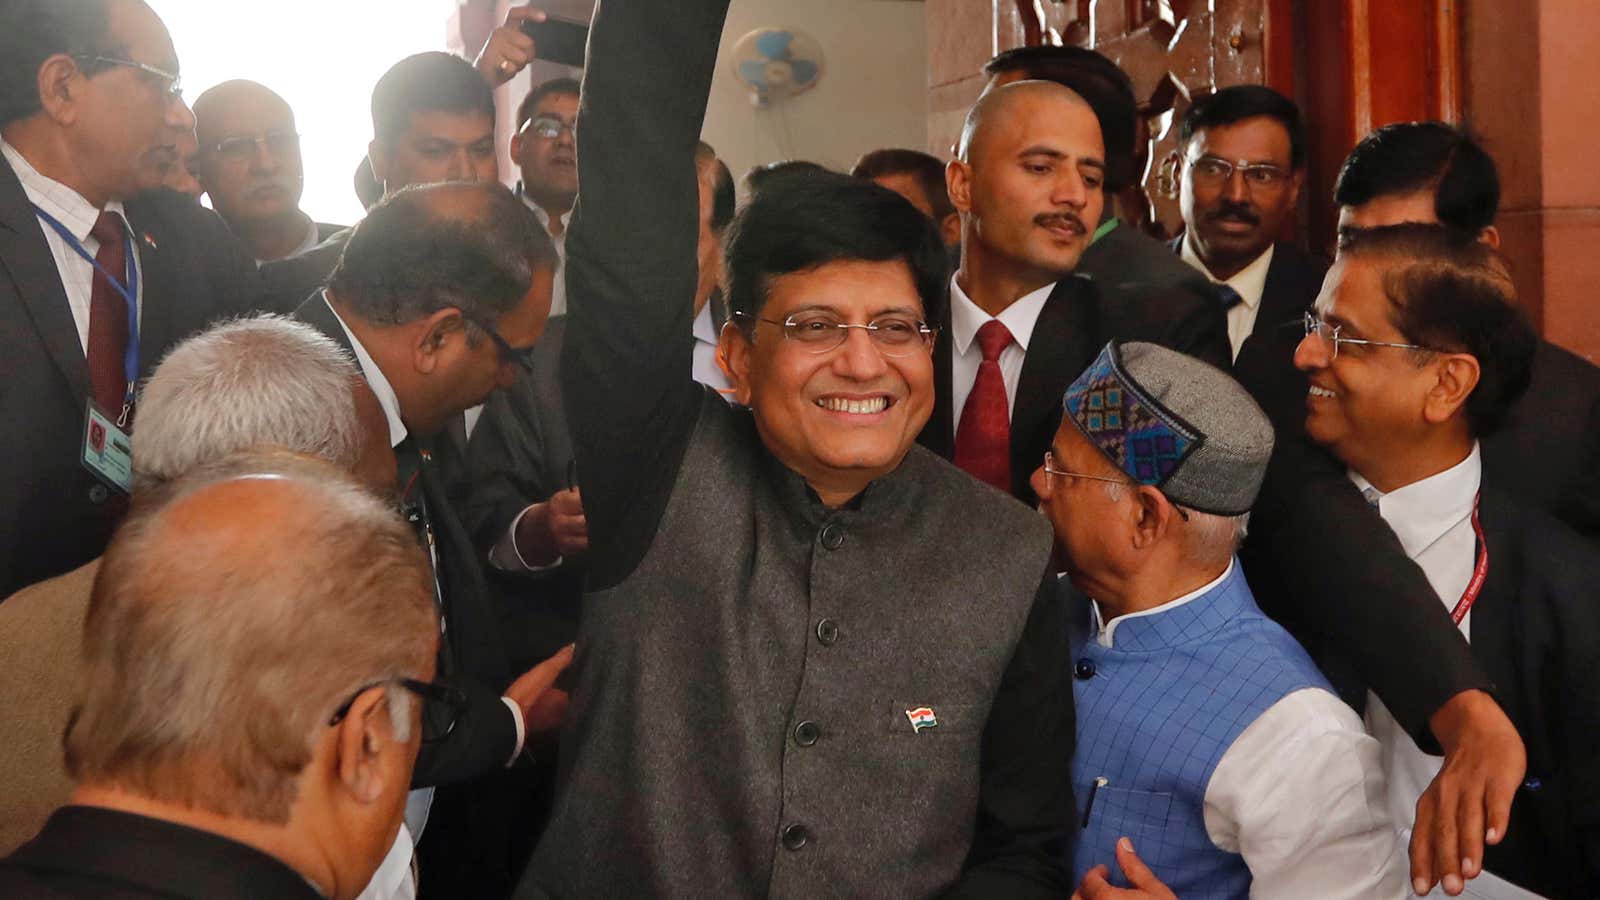 India’s interim Finance Minister Piyush Goyal waves as he holds his briefcase upon arrives at the parliament to present 2019-20 budget in New Delhi, India,…